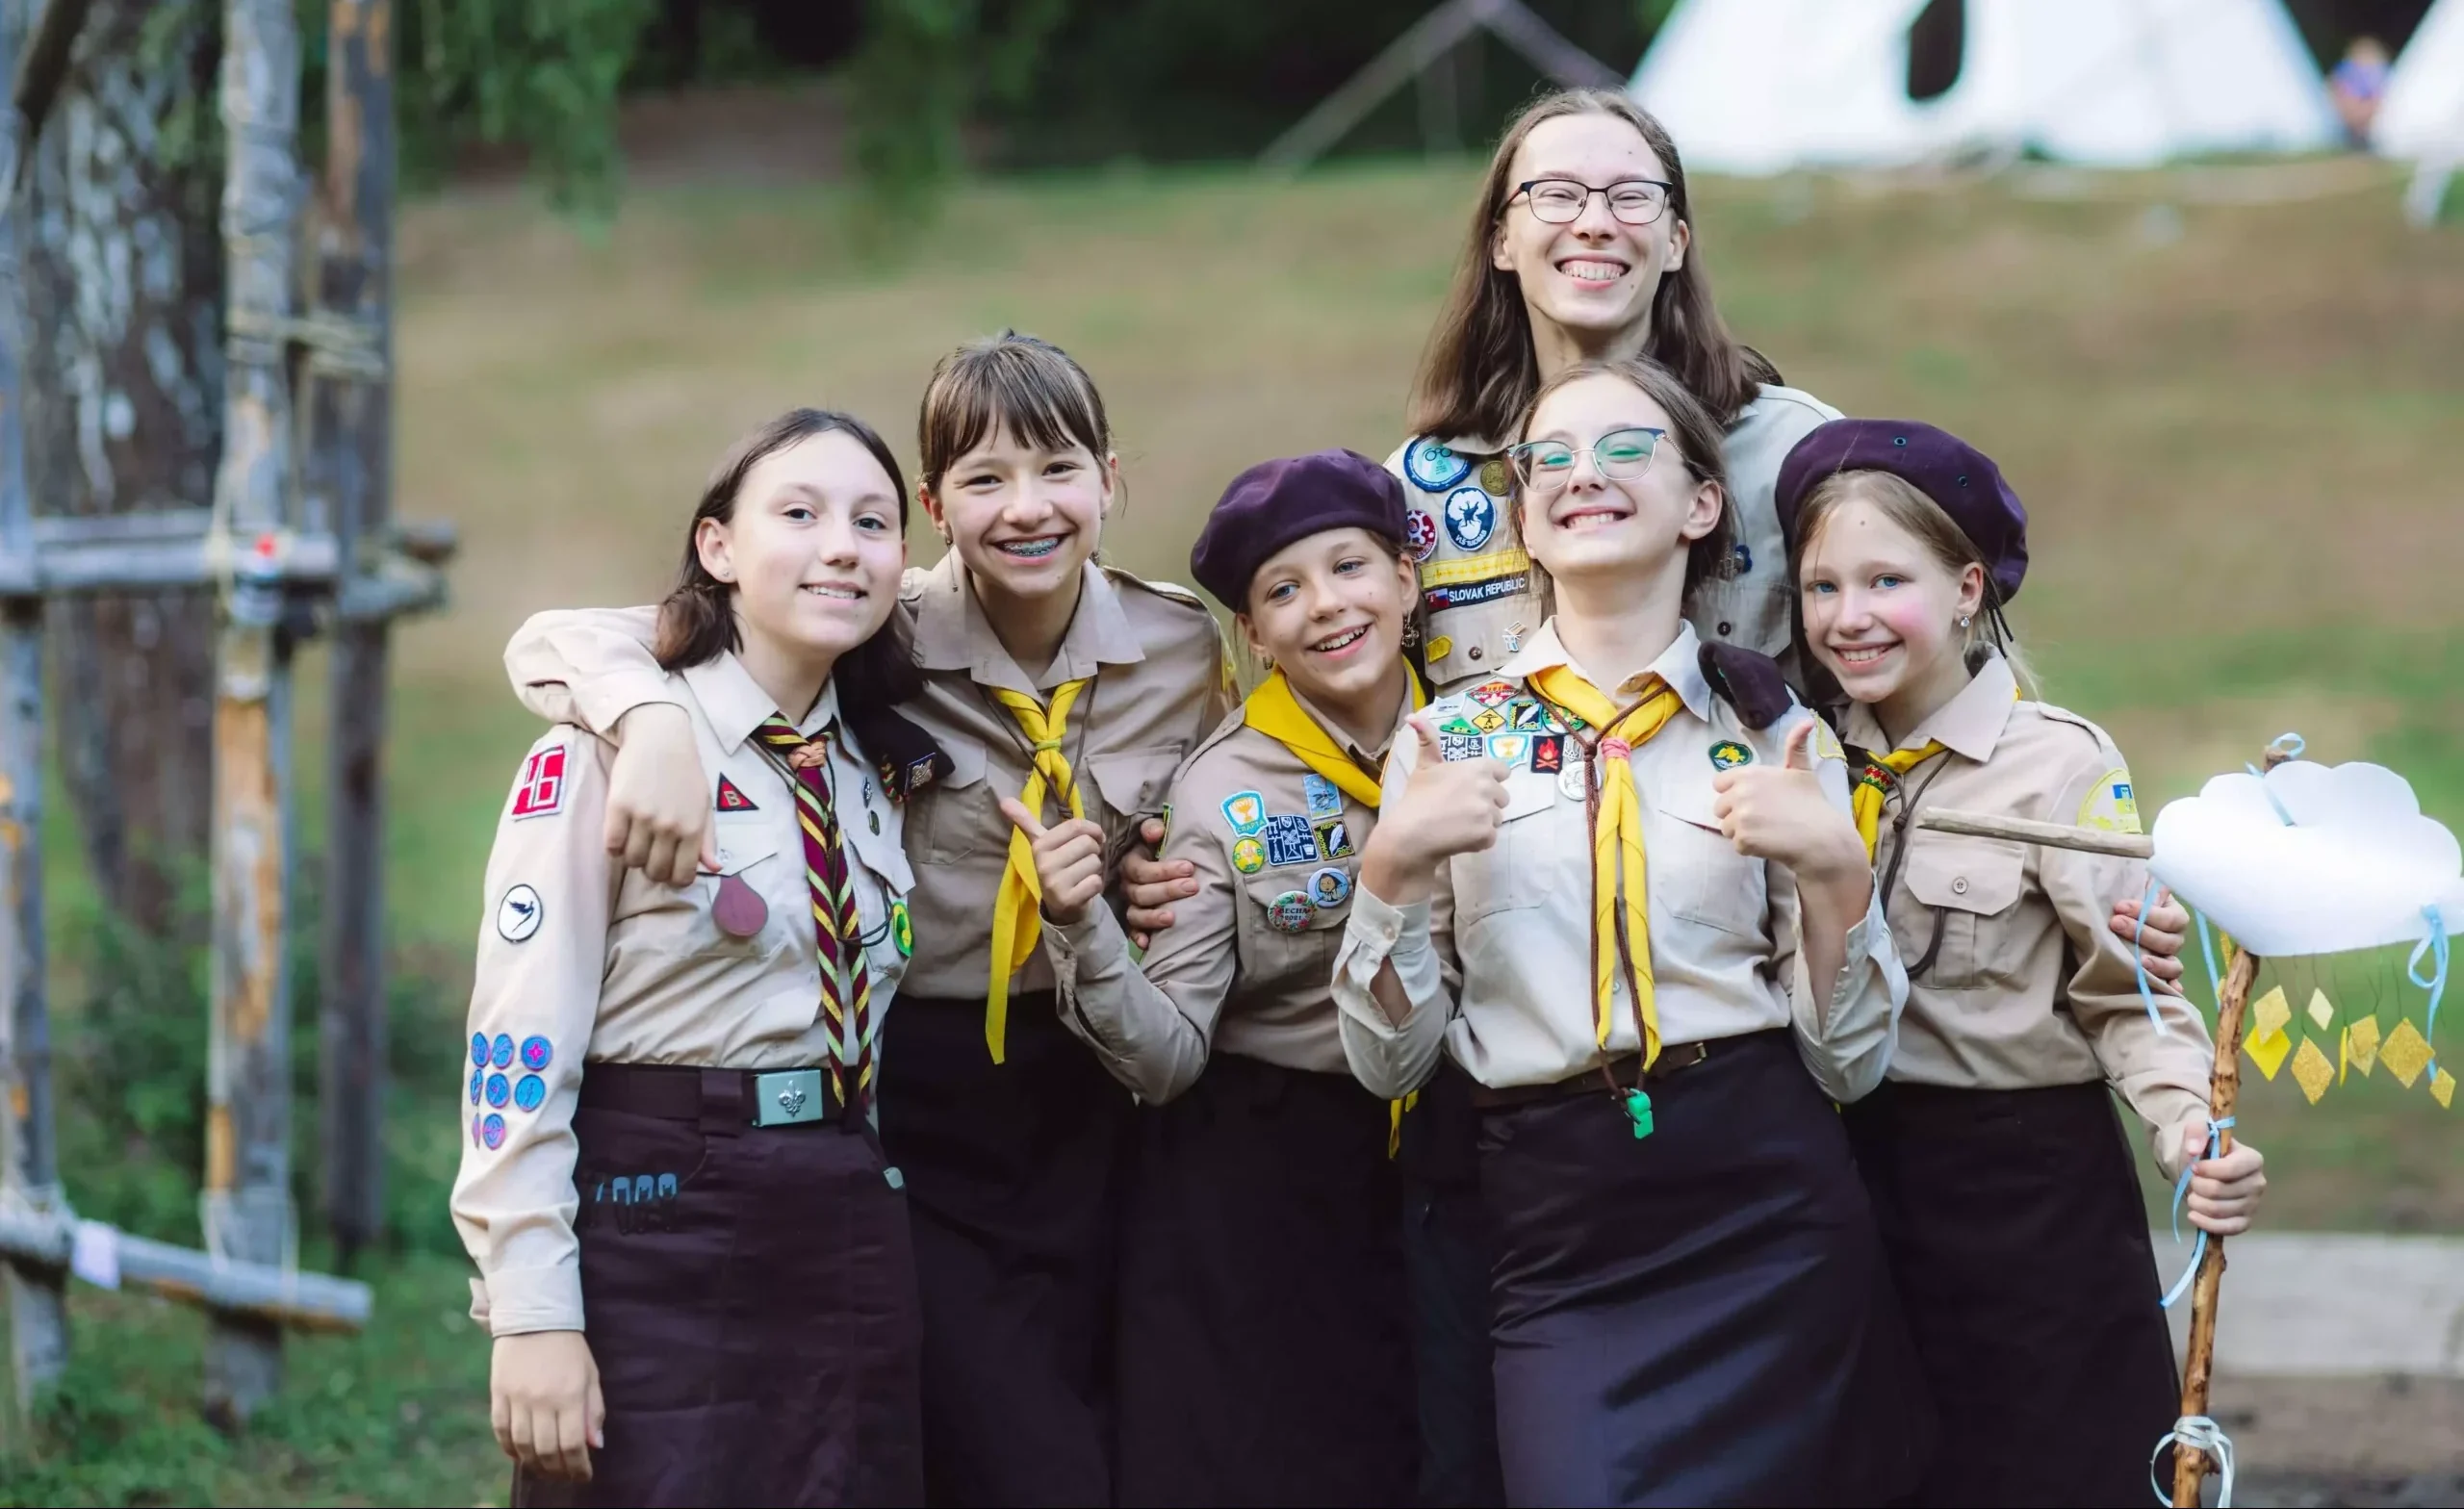 8 elements of the Plast (Scout) educational method